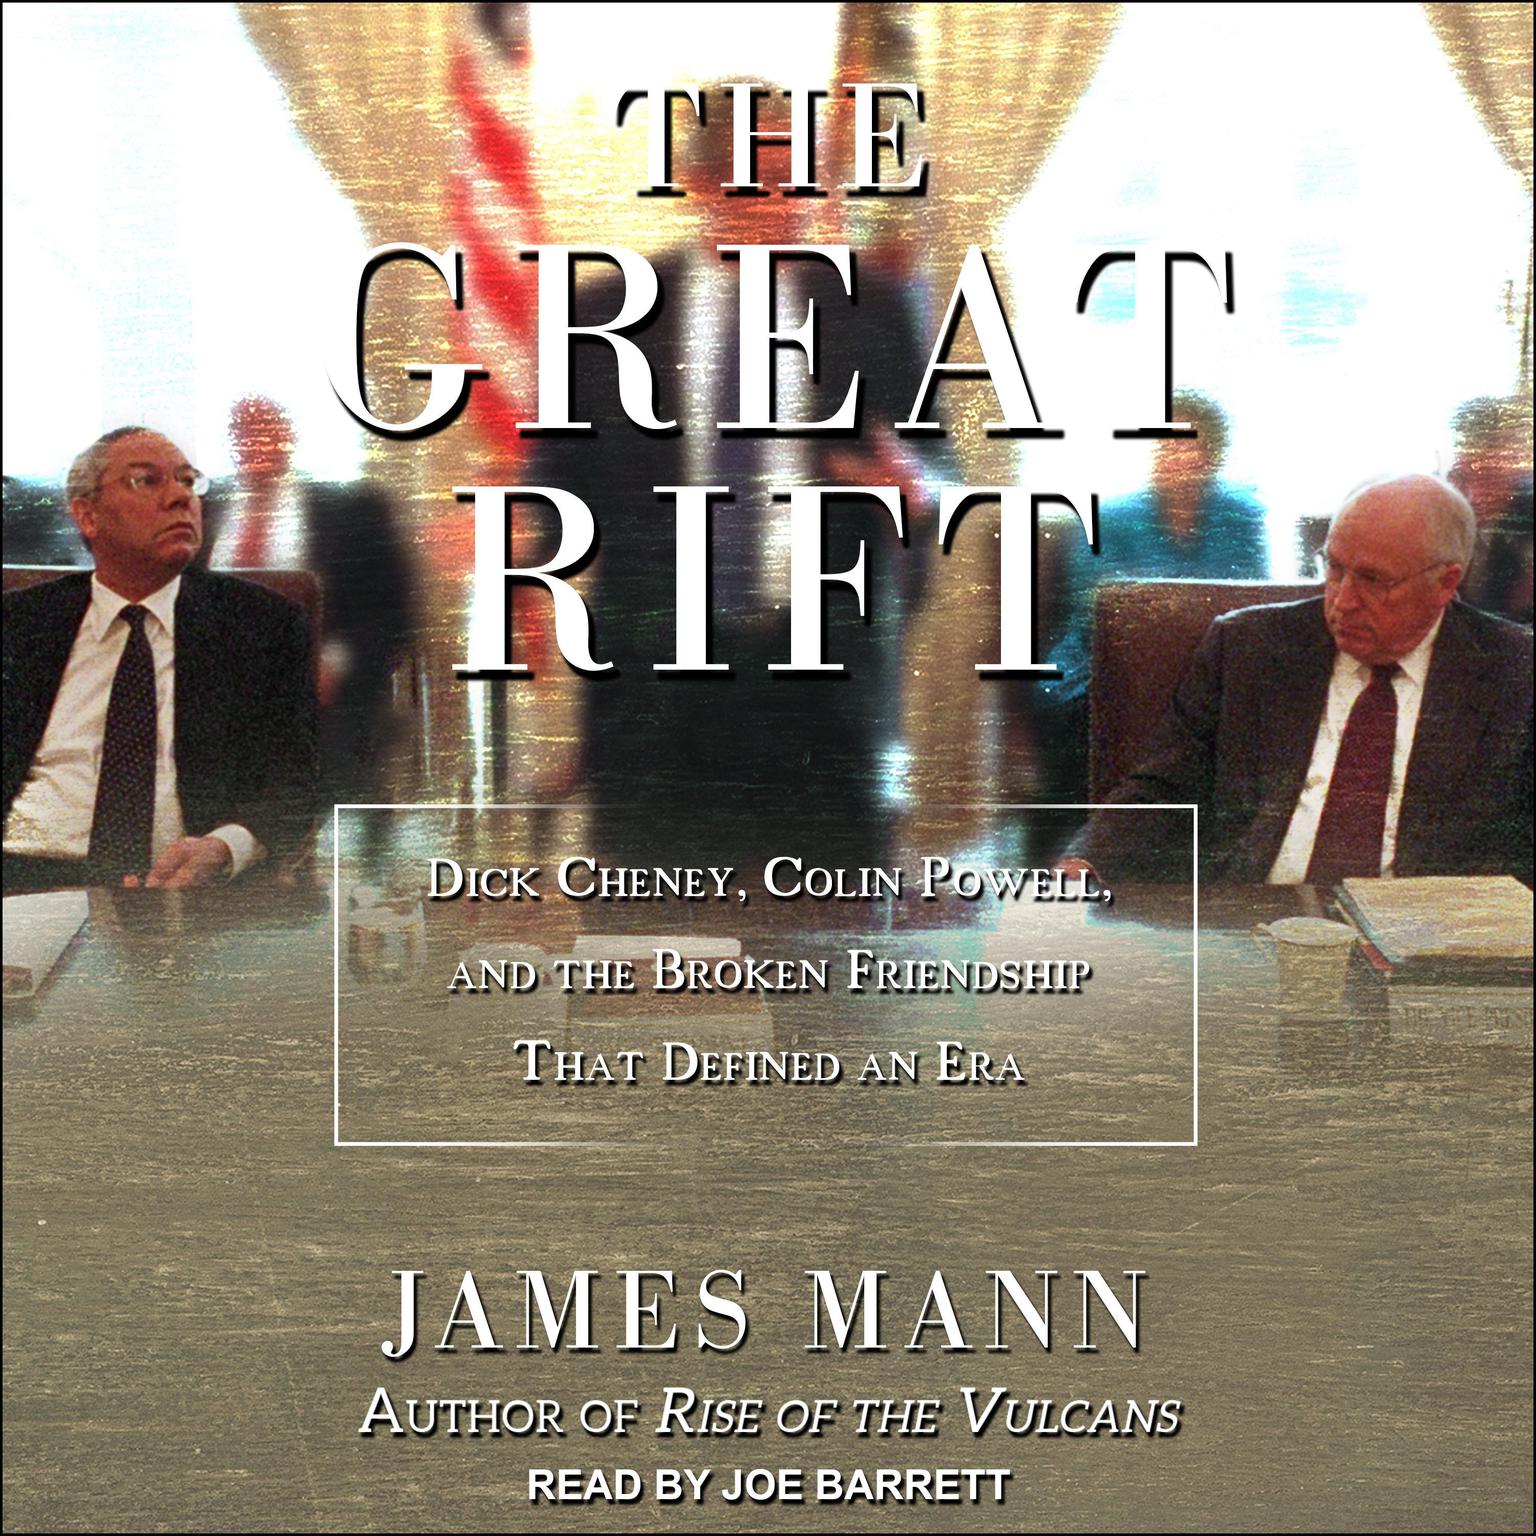 The Great Rift: Dick Cheney, Colin Powell, and the Broken Friendship That Defined an Era Audiobook, by James Mann